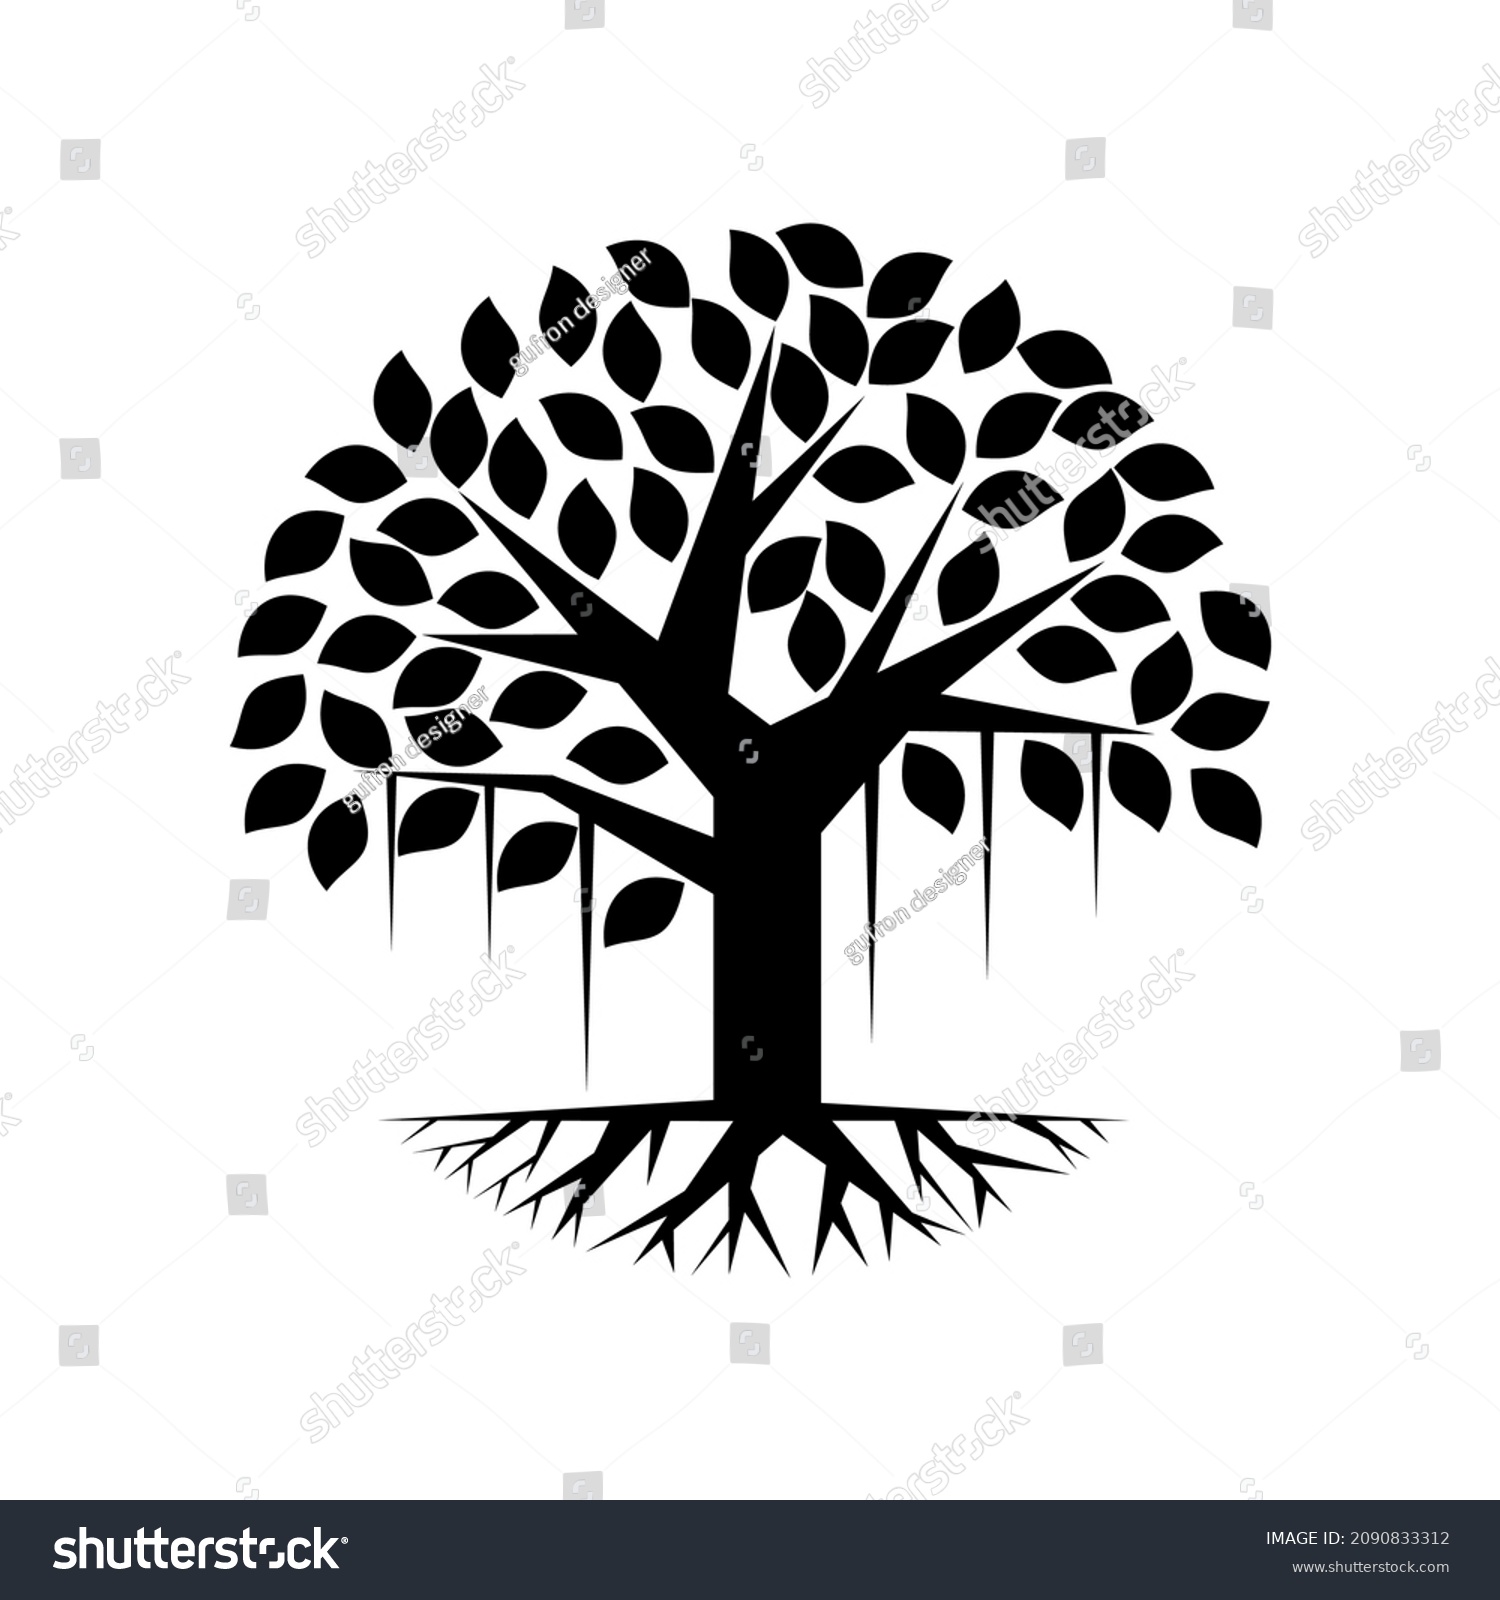 SVG of Banyan tree logo design template. tree silhouette vector isolated on white background. svg